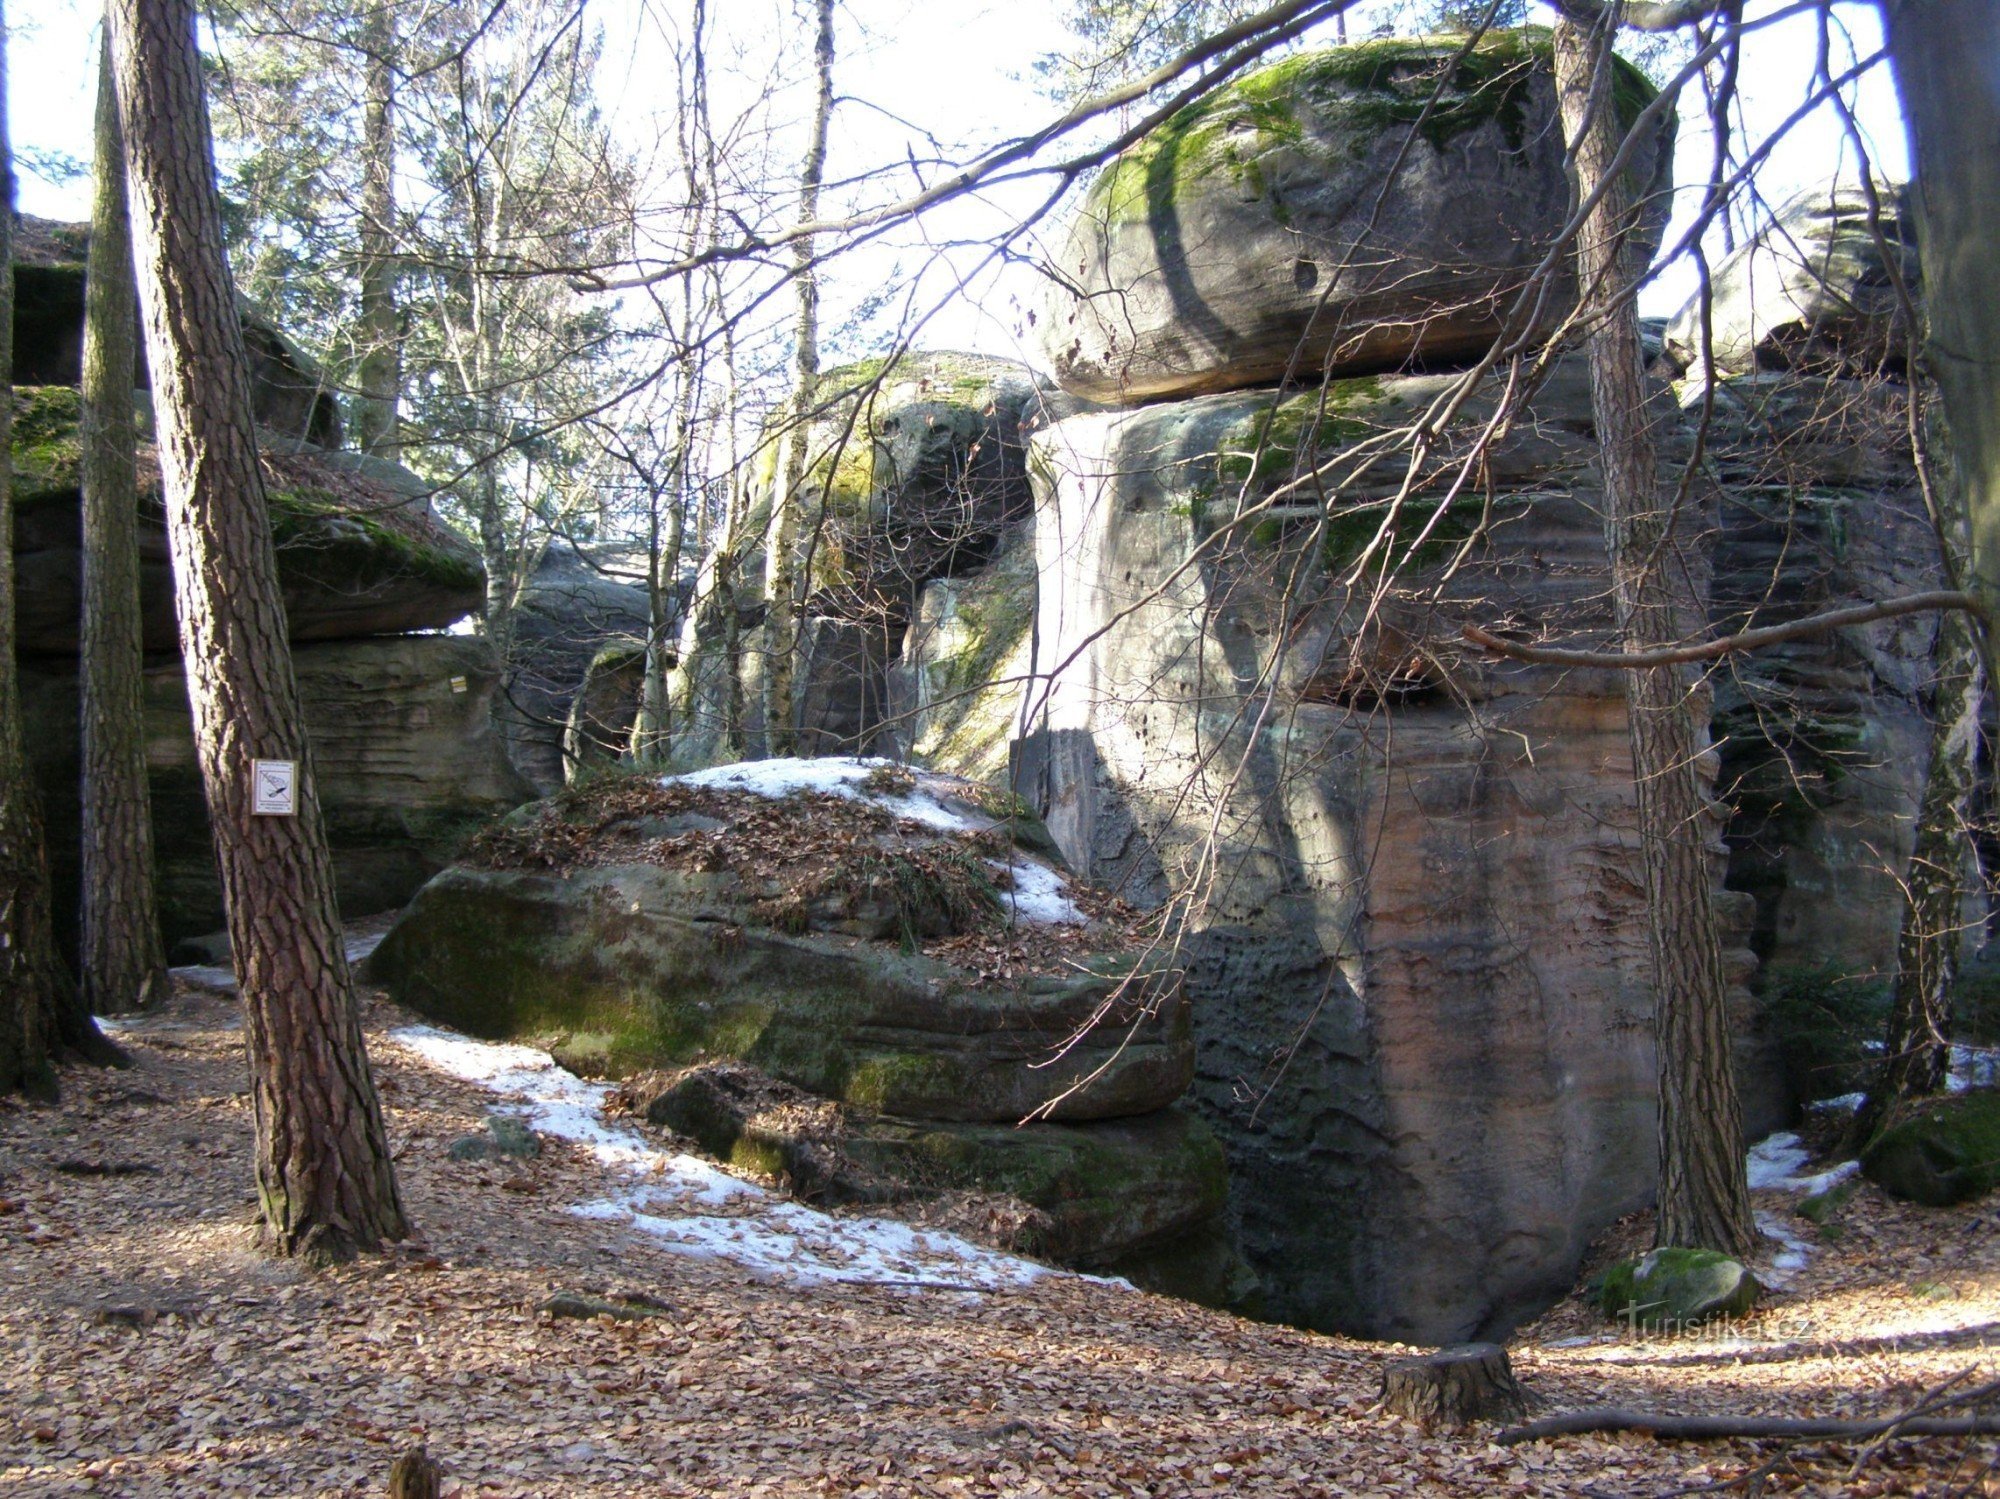 Entrance to the rock maze near the Lord's Field